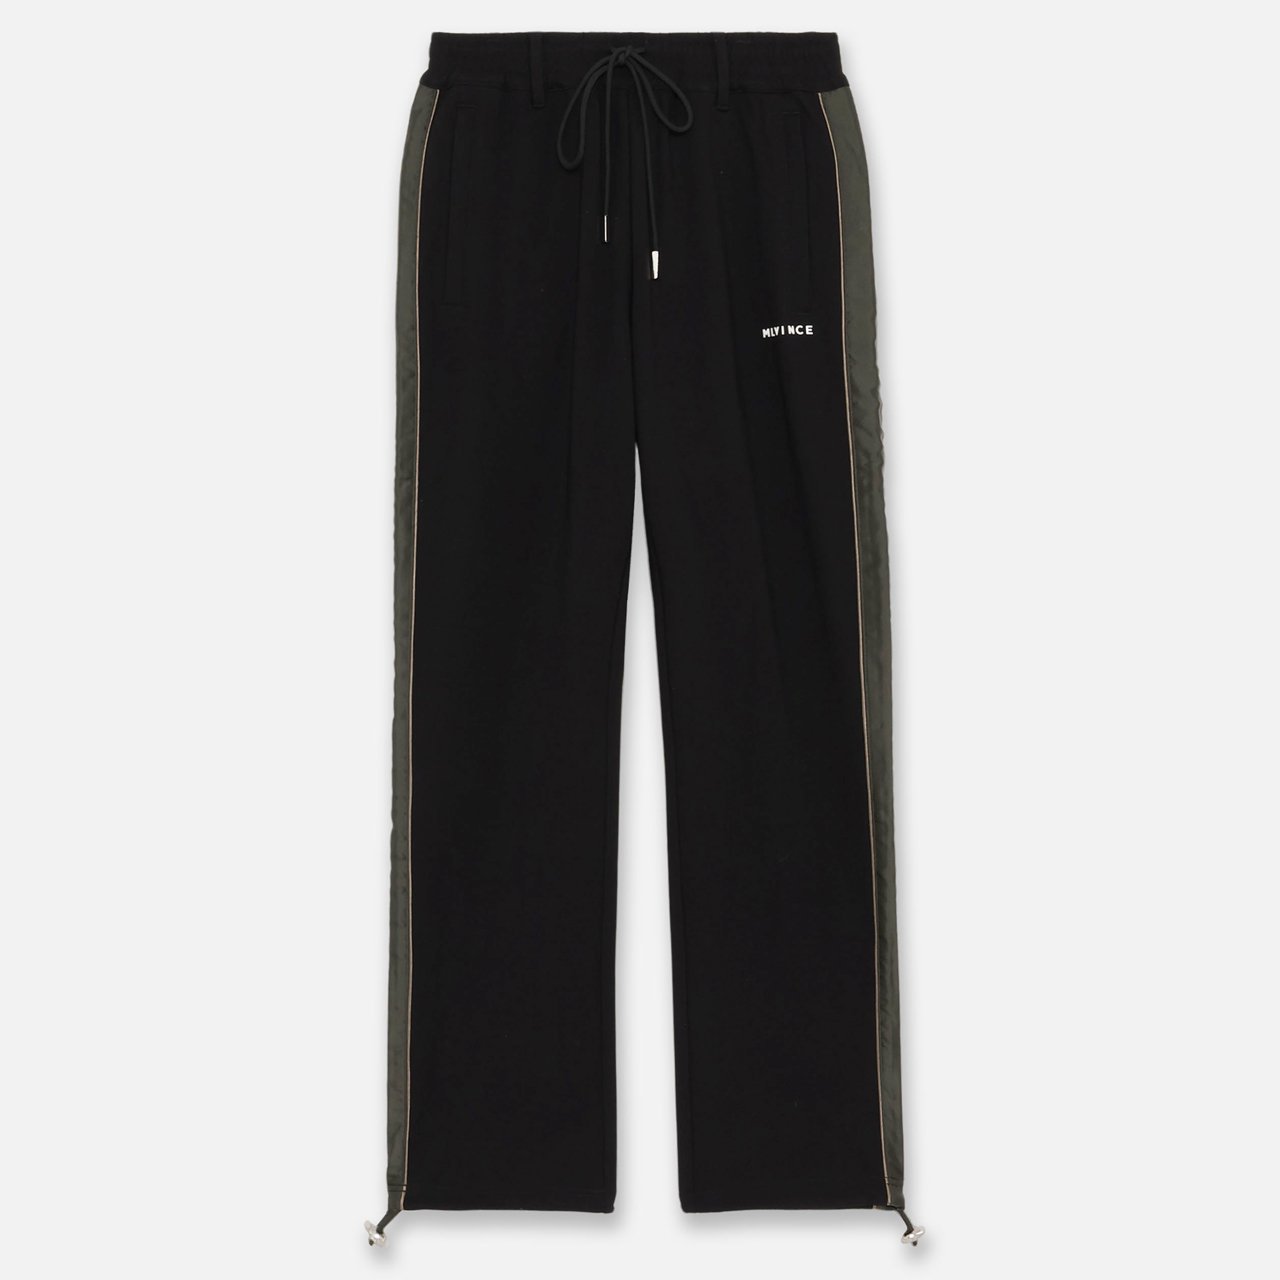 MLVINCE (メルヴィンス)｜LUX TRACK PANTS BLACK トラックパンツ 正規